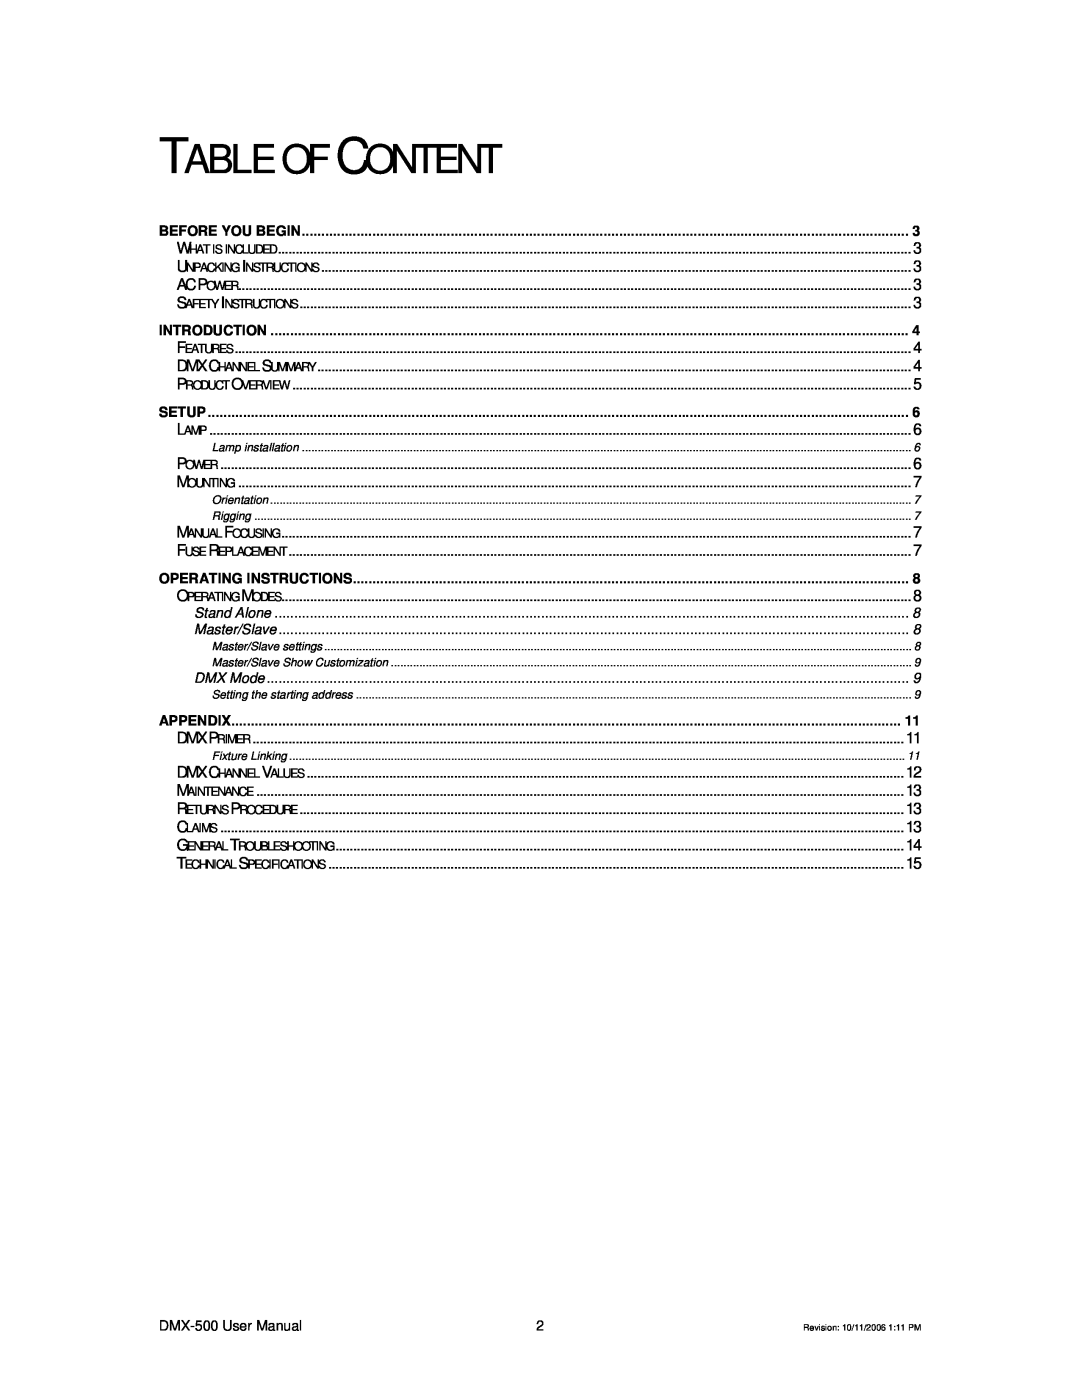 Chauvet DMX-500 user manual Table Of Content, Before You Begin 